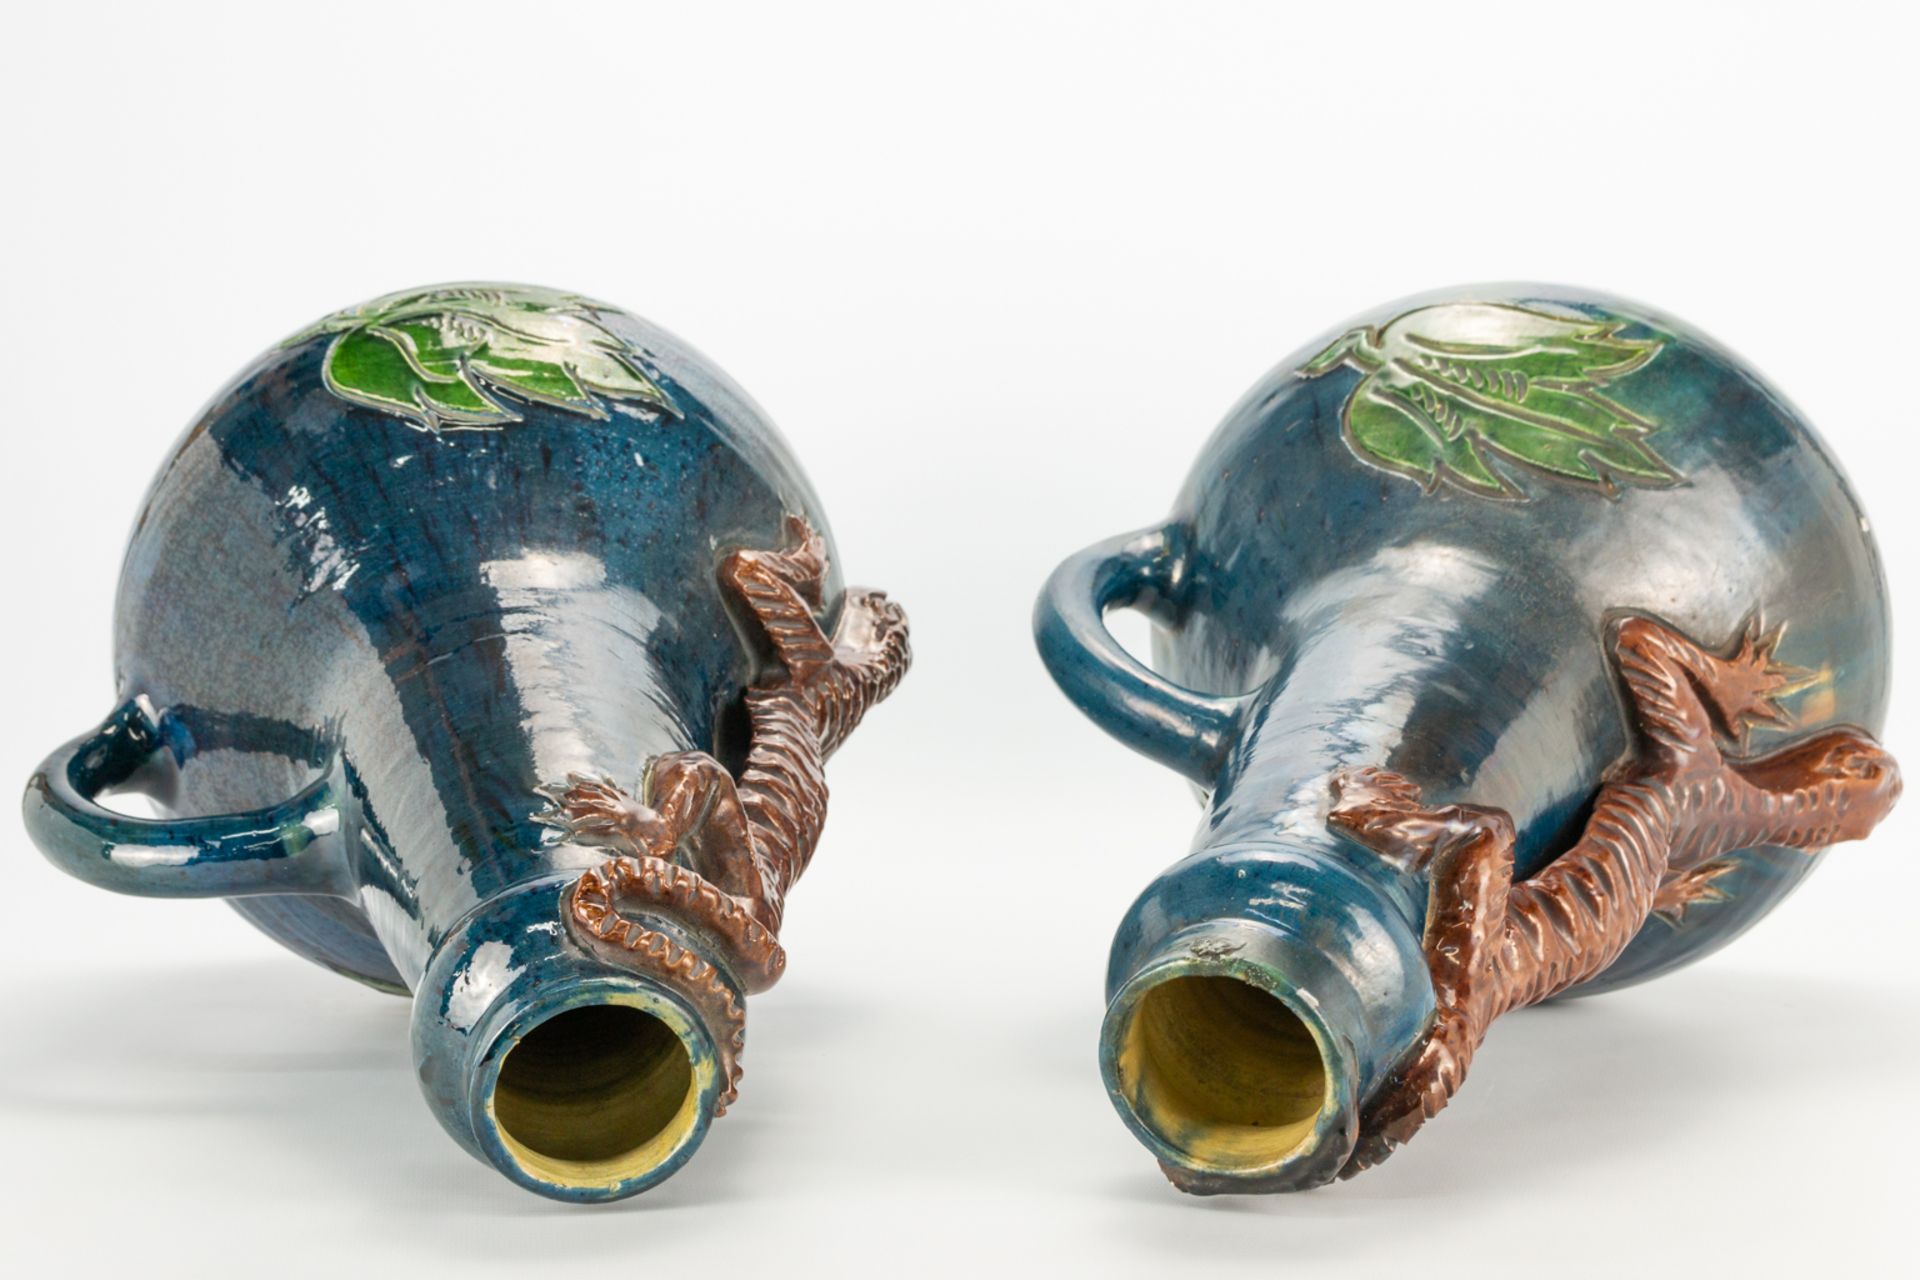 A pair of vases made in Flemish Earthenware with the decor of a salamander. (27 x 30 x 45 cm) - Image 13 of 20